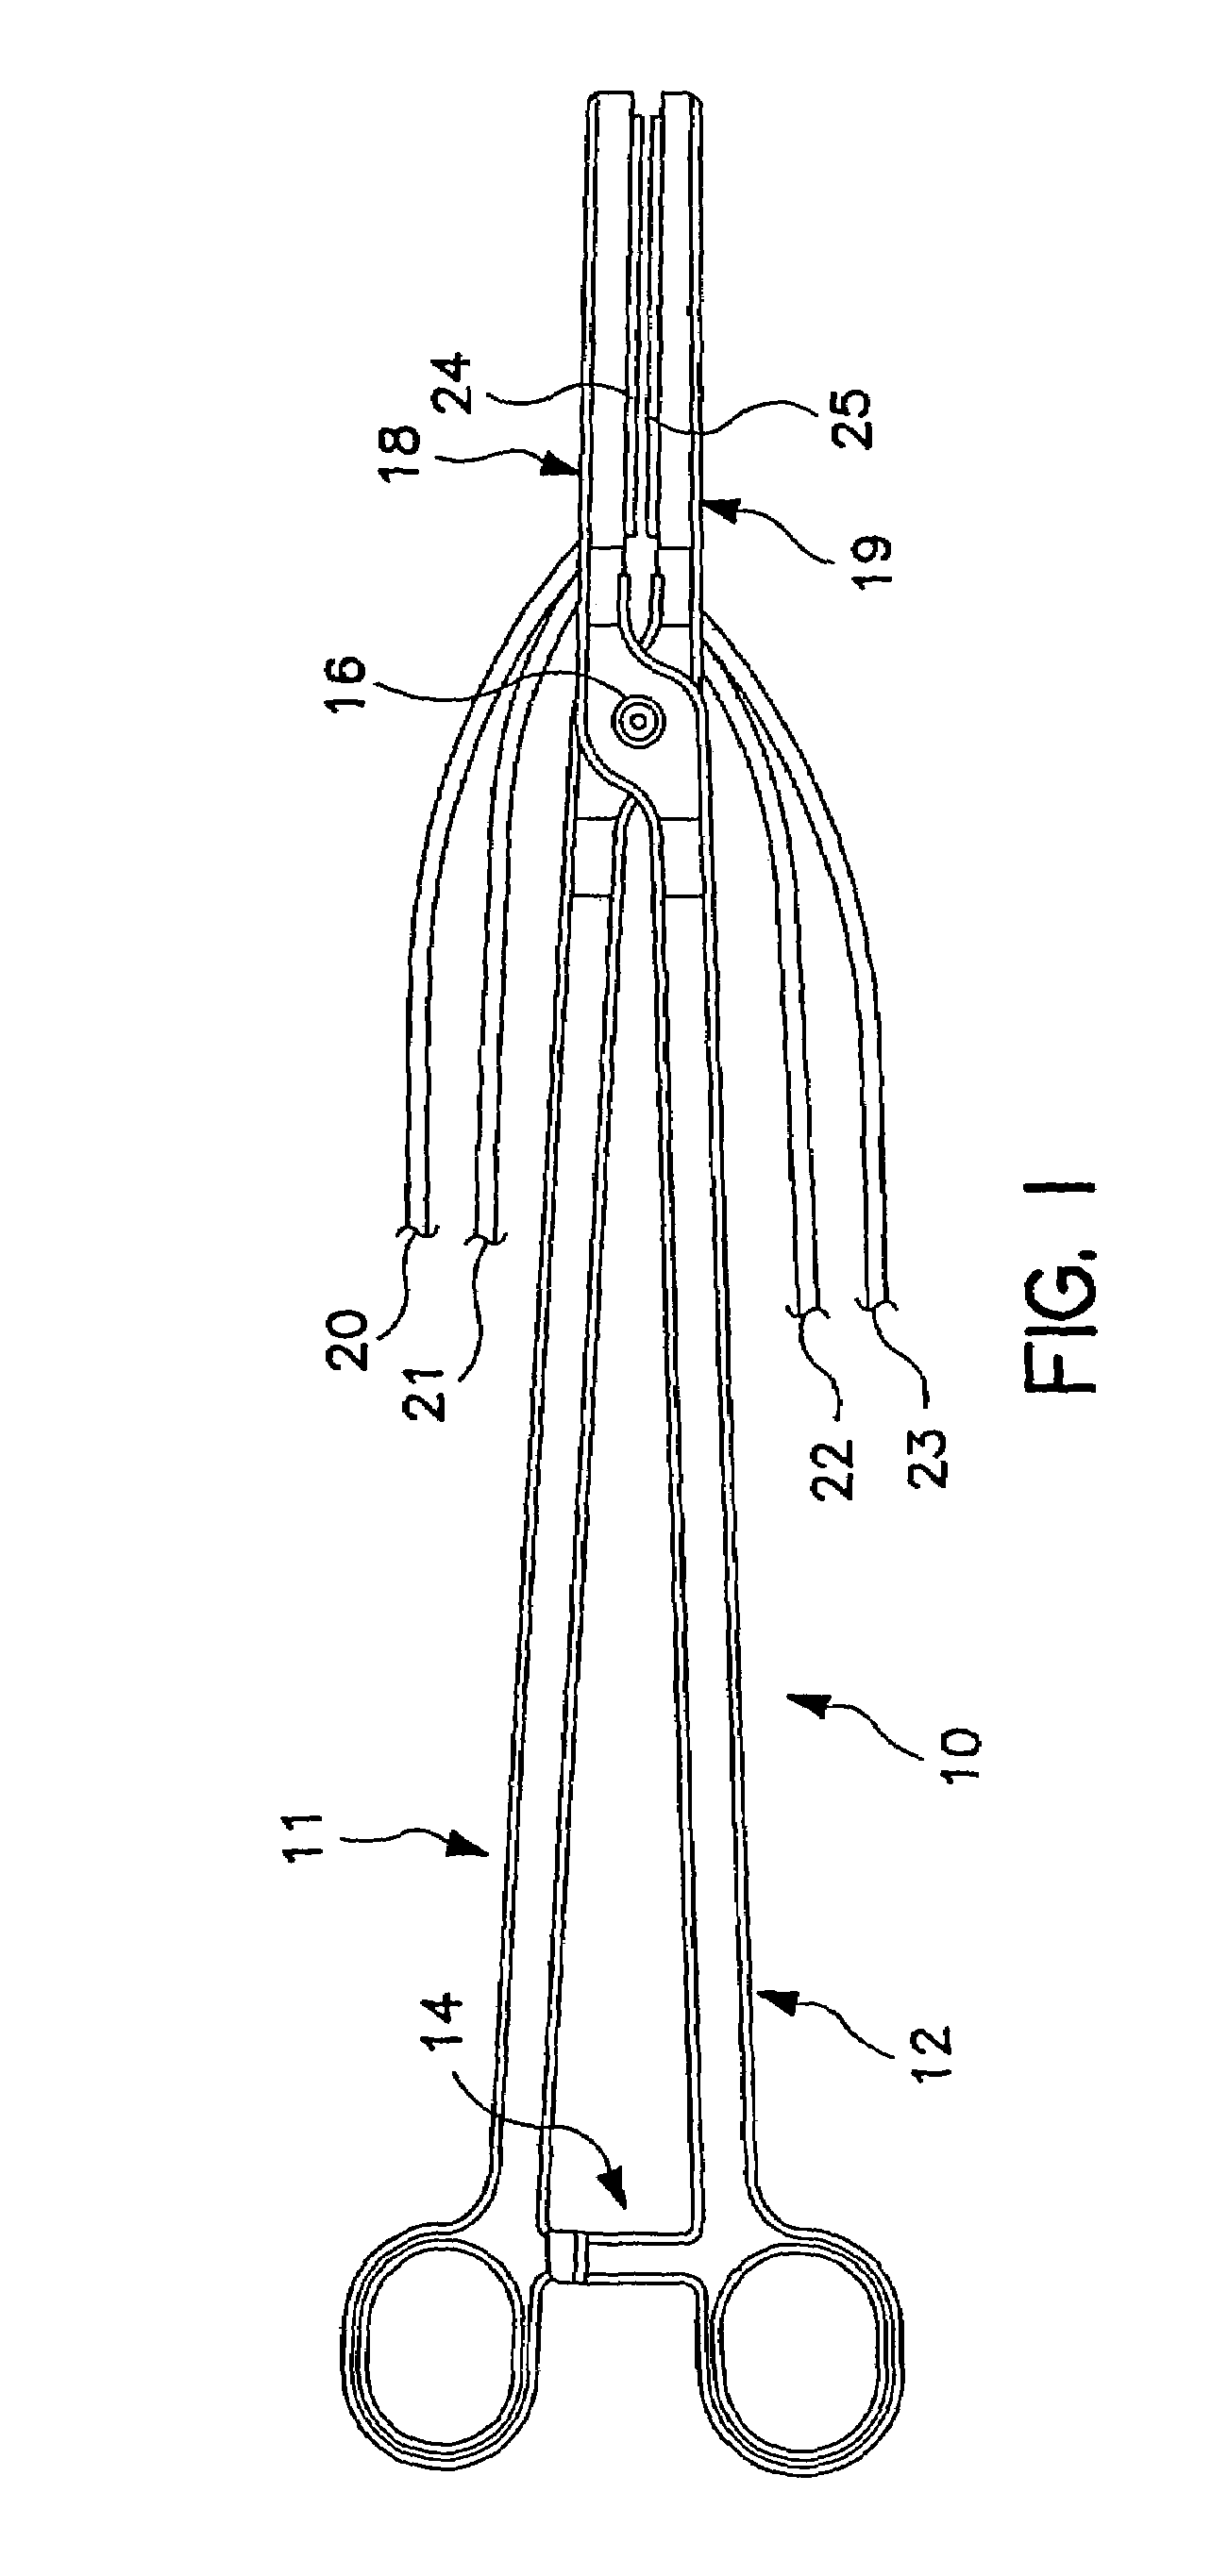 Ablation system and method of use